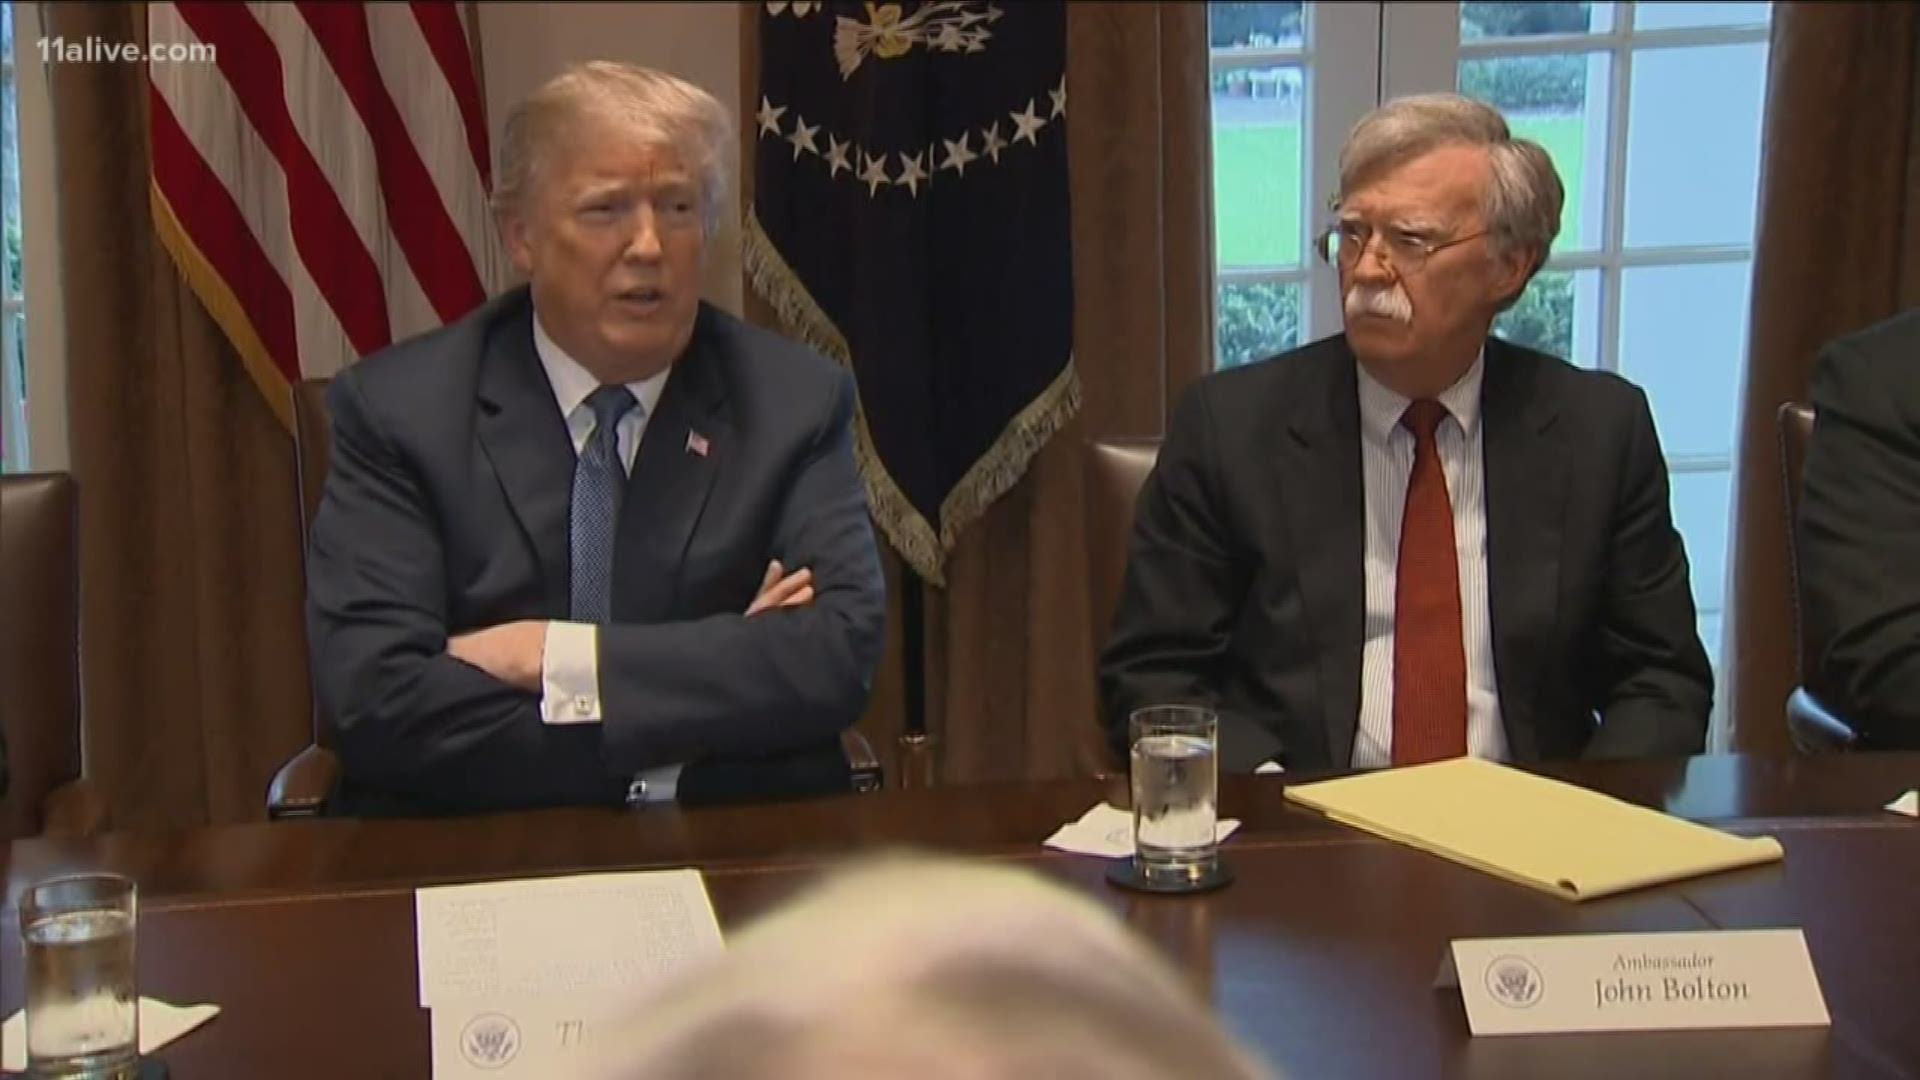 Trump says he asked for Bolton's resignation after he 'disagreed strongly' with Bolton. Bolton said the resignation was his own decision.